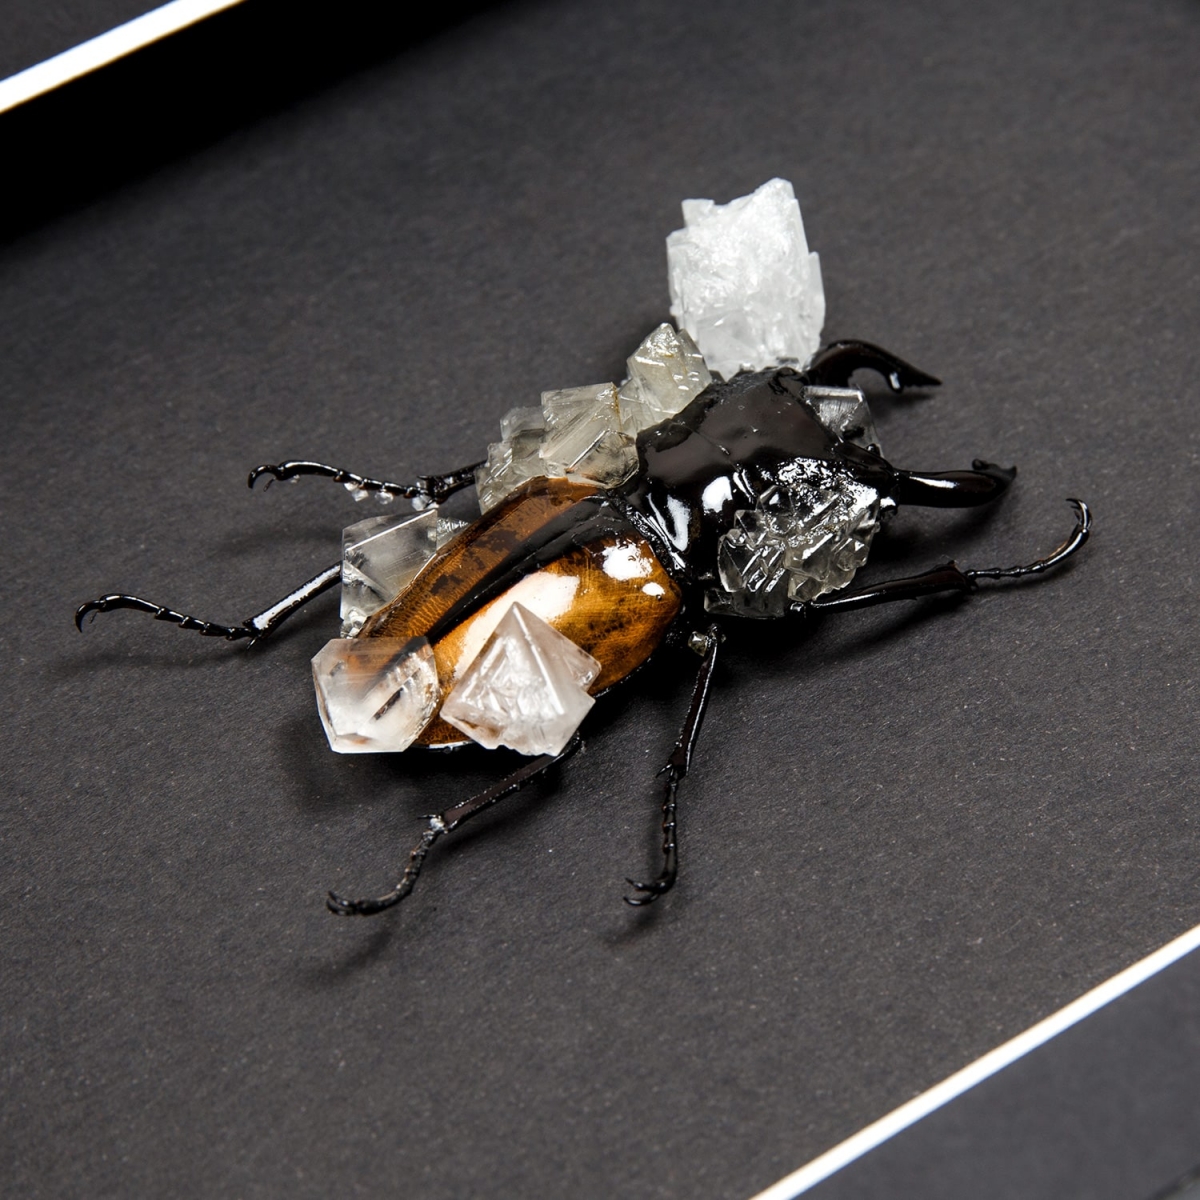 Stag Beetle (Lucanidae odontolabis ludekingi) with Clear Crystals in Box Frame